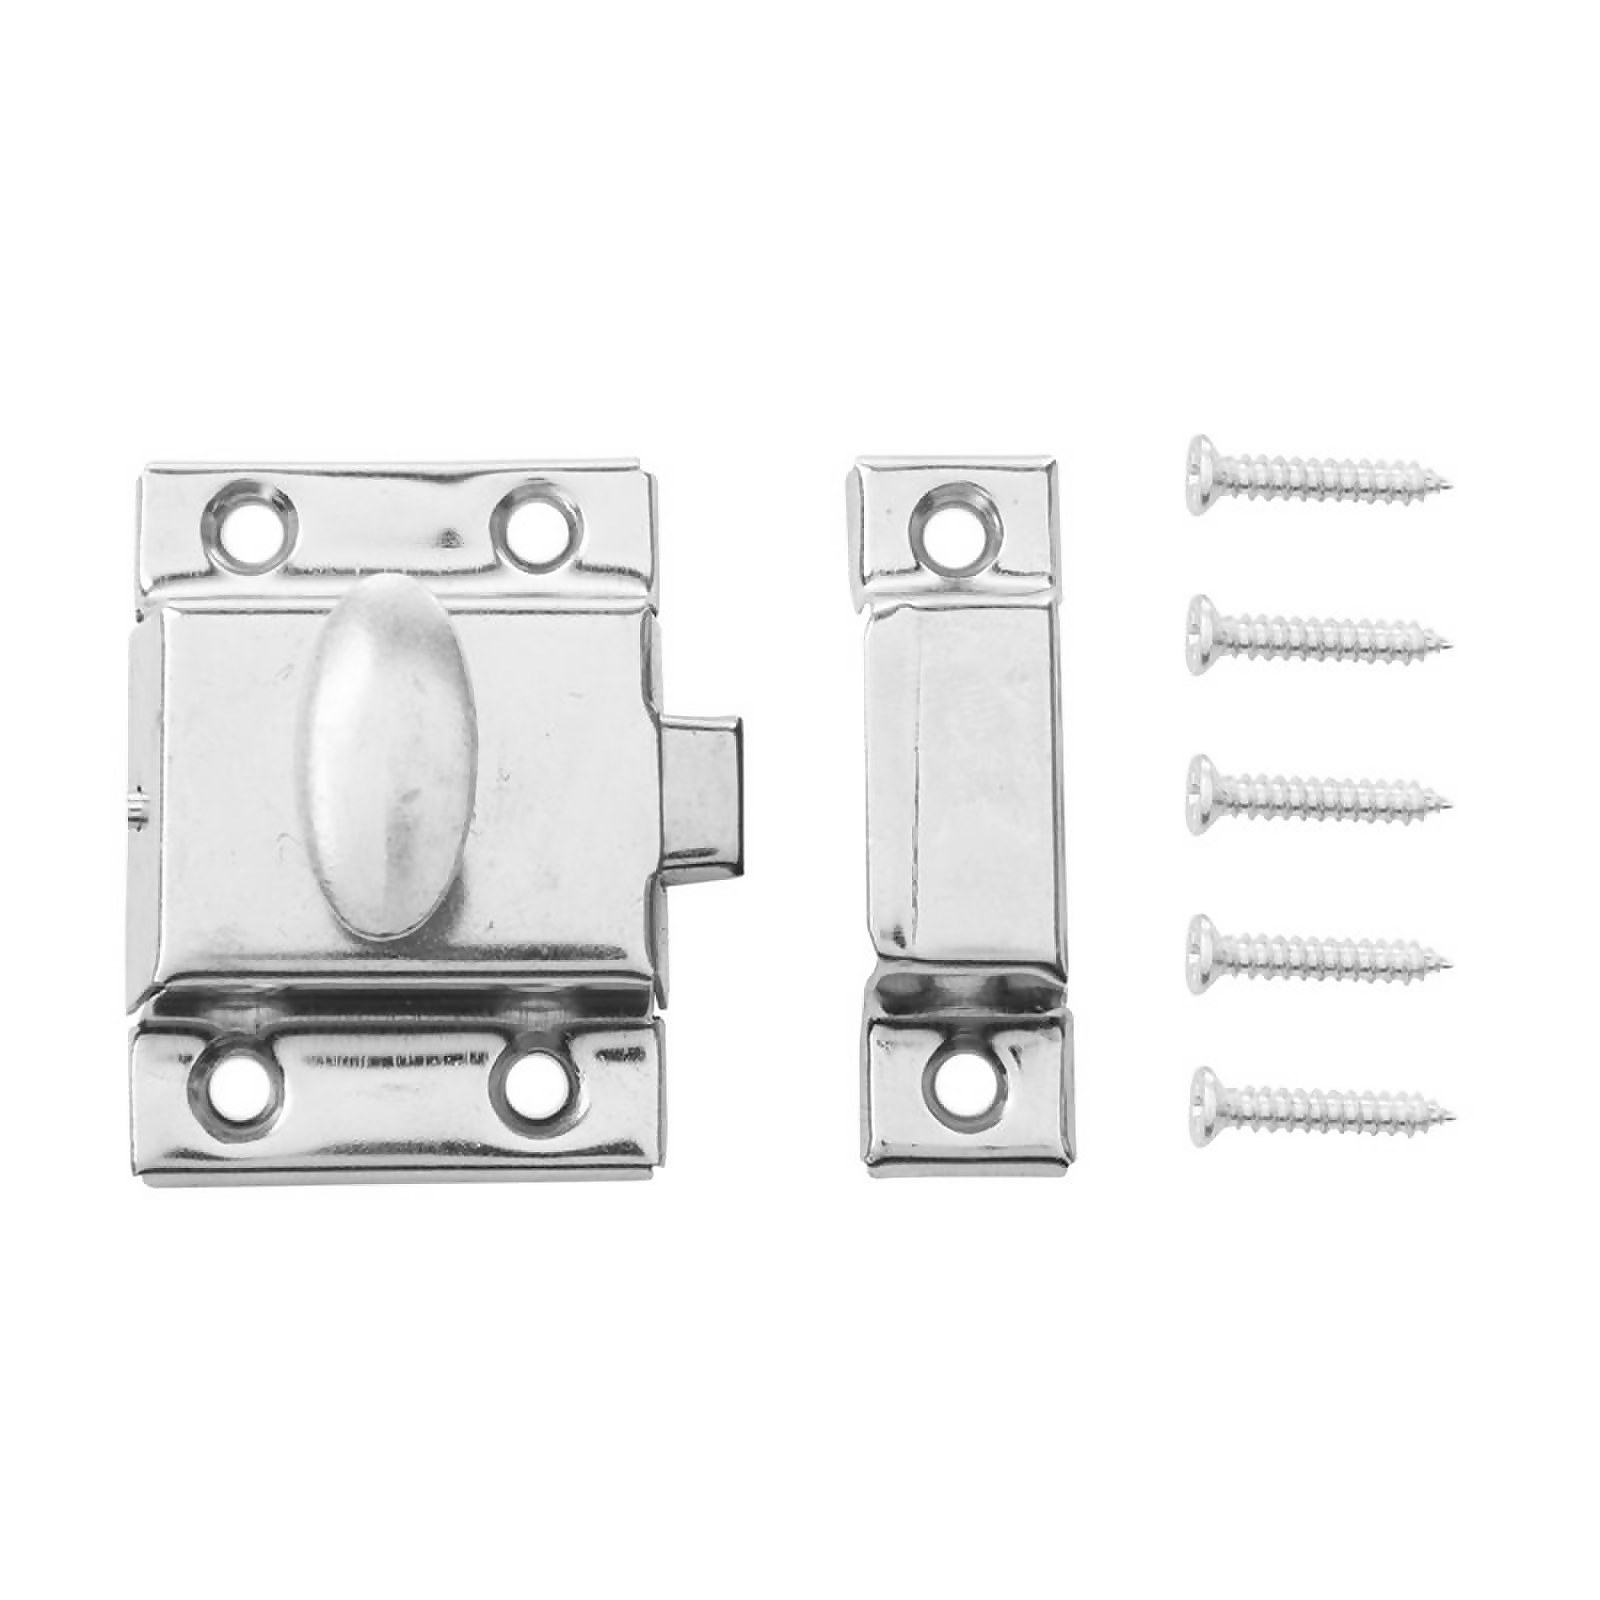 Photo of Cupboard Catch - Nickel - 40mm - 1 Pack